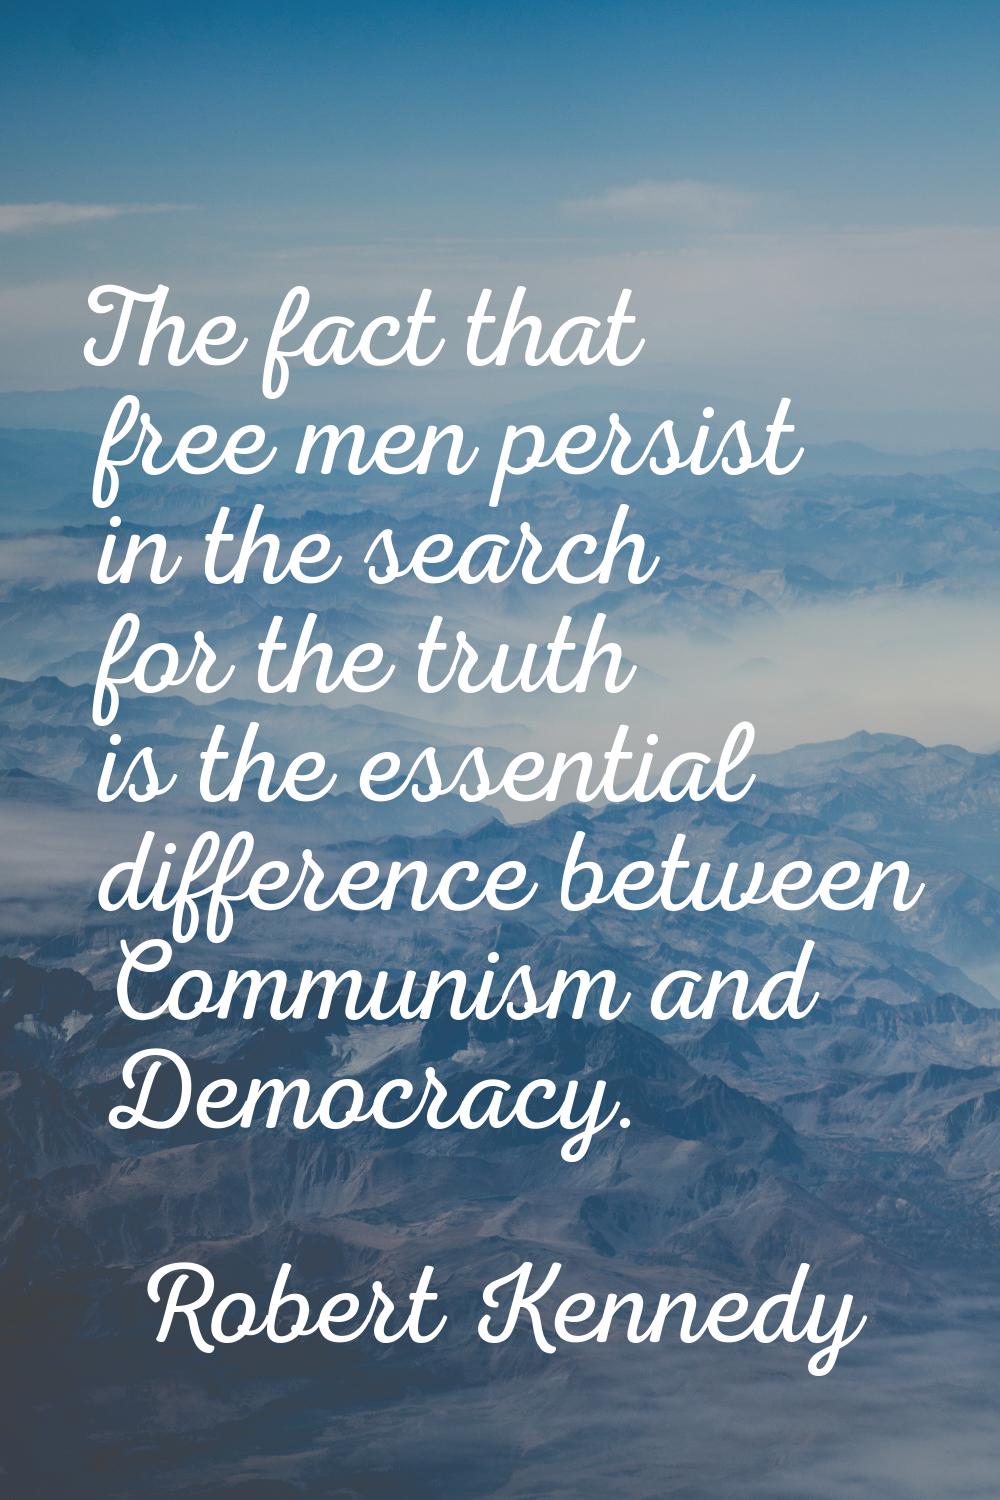 The fact that free men persist in the search for the truth is the essential difference between Comm